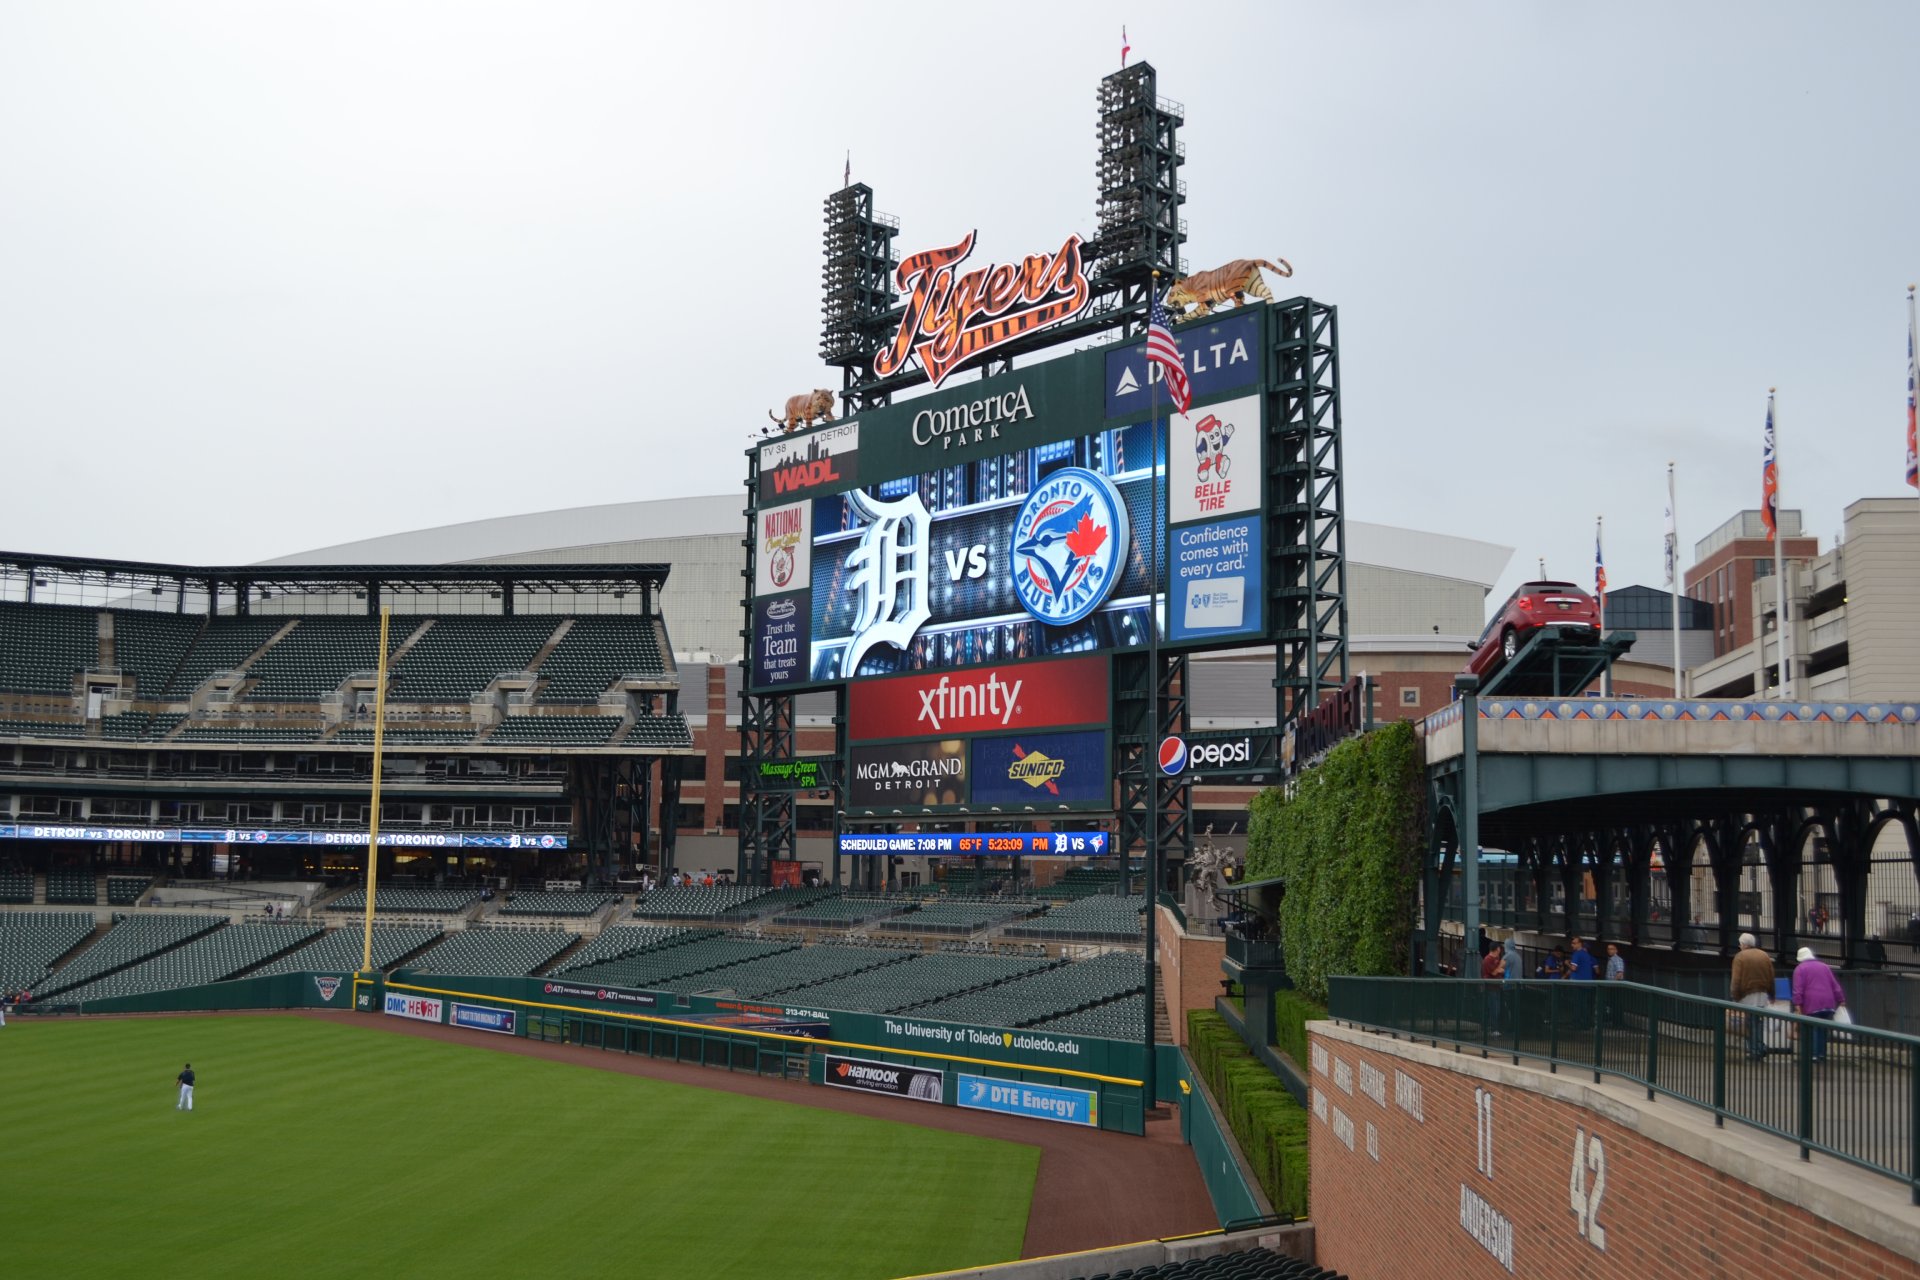 The large Tiger statues atop the video board offer a unique look that fans can enjoy.